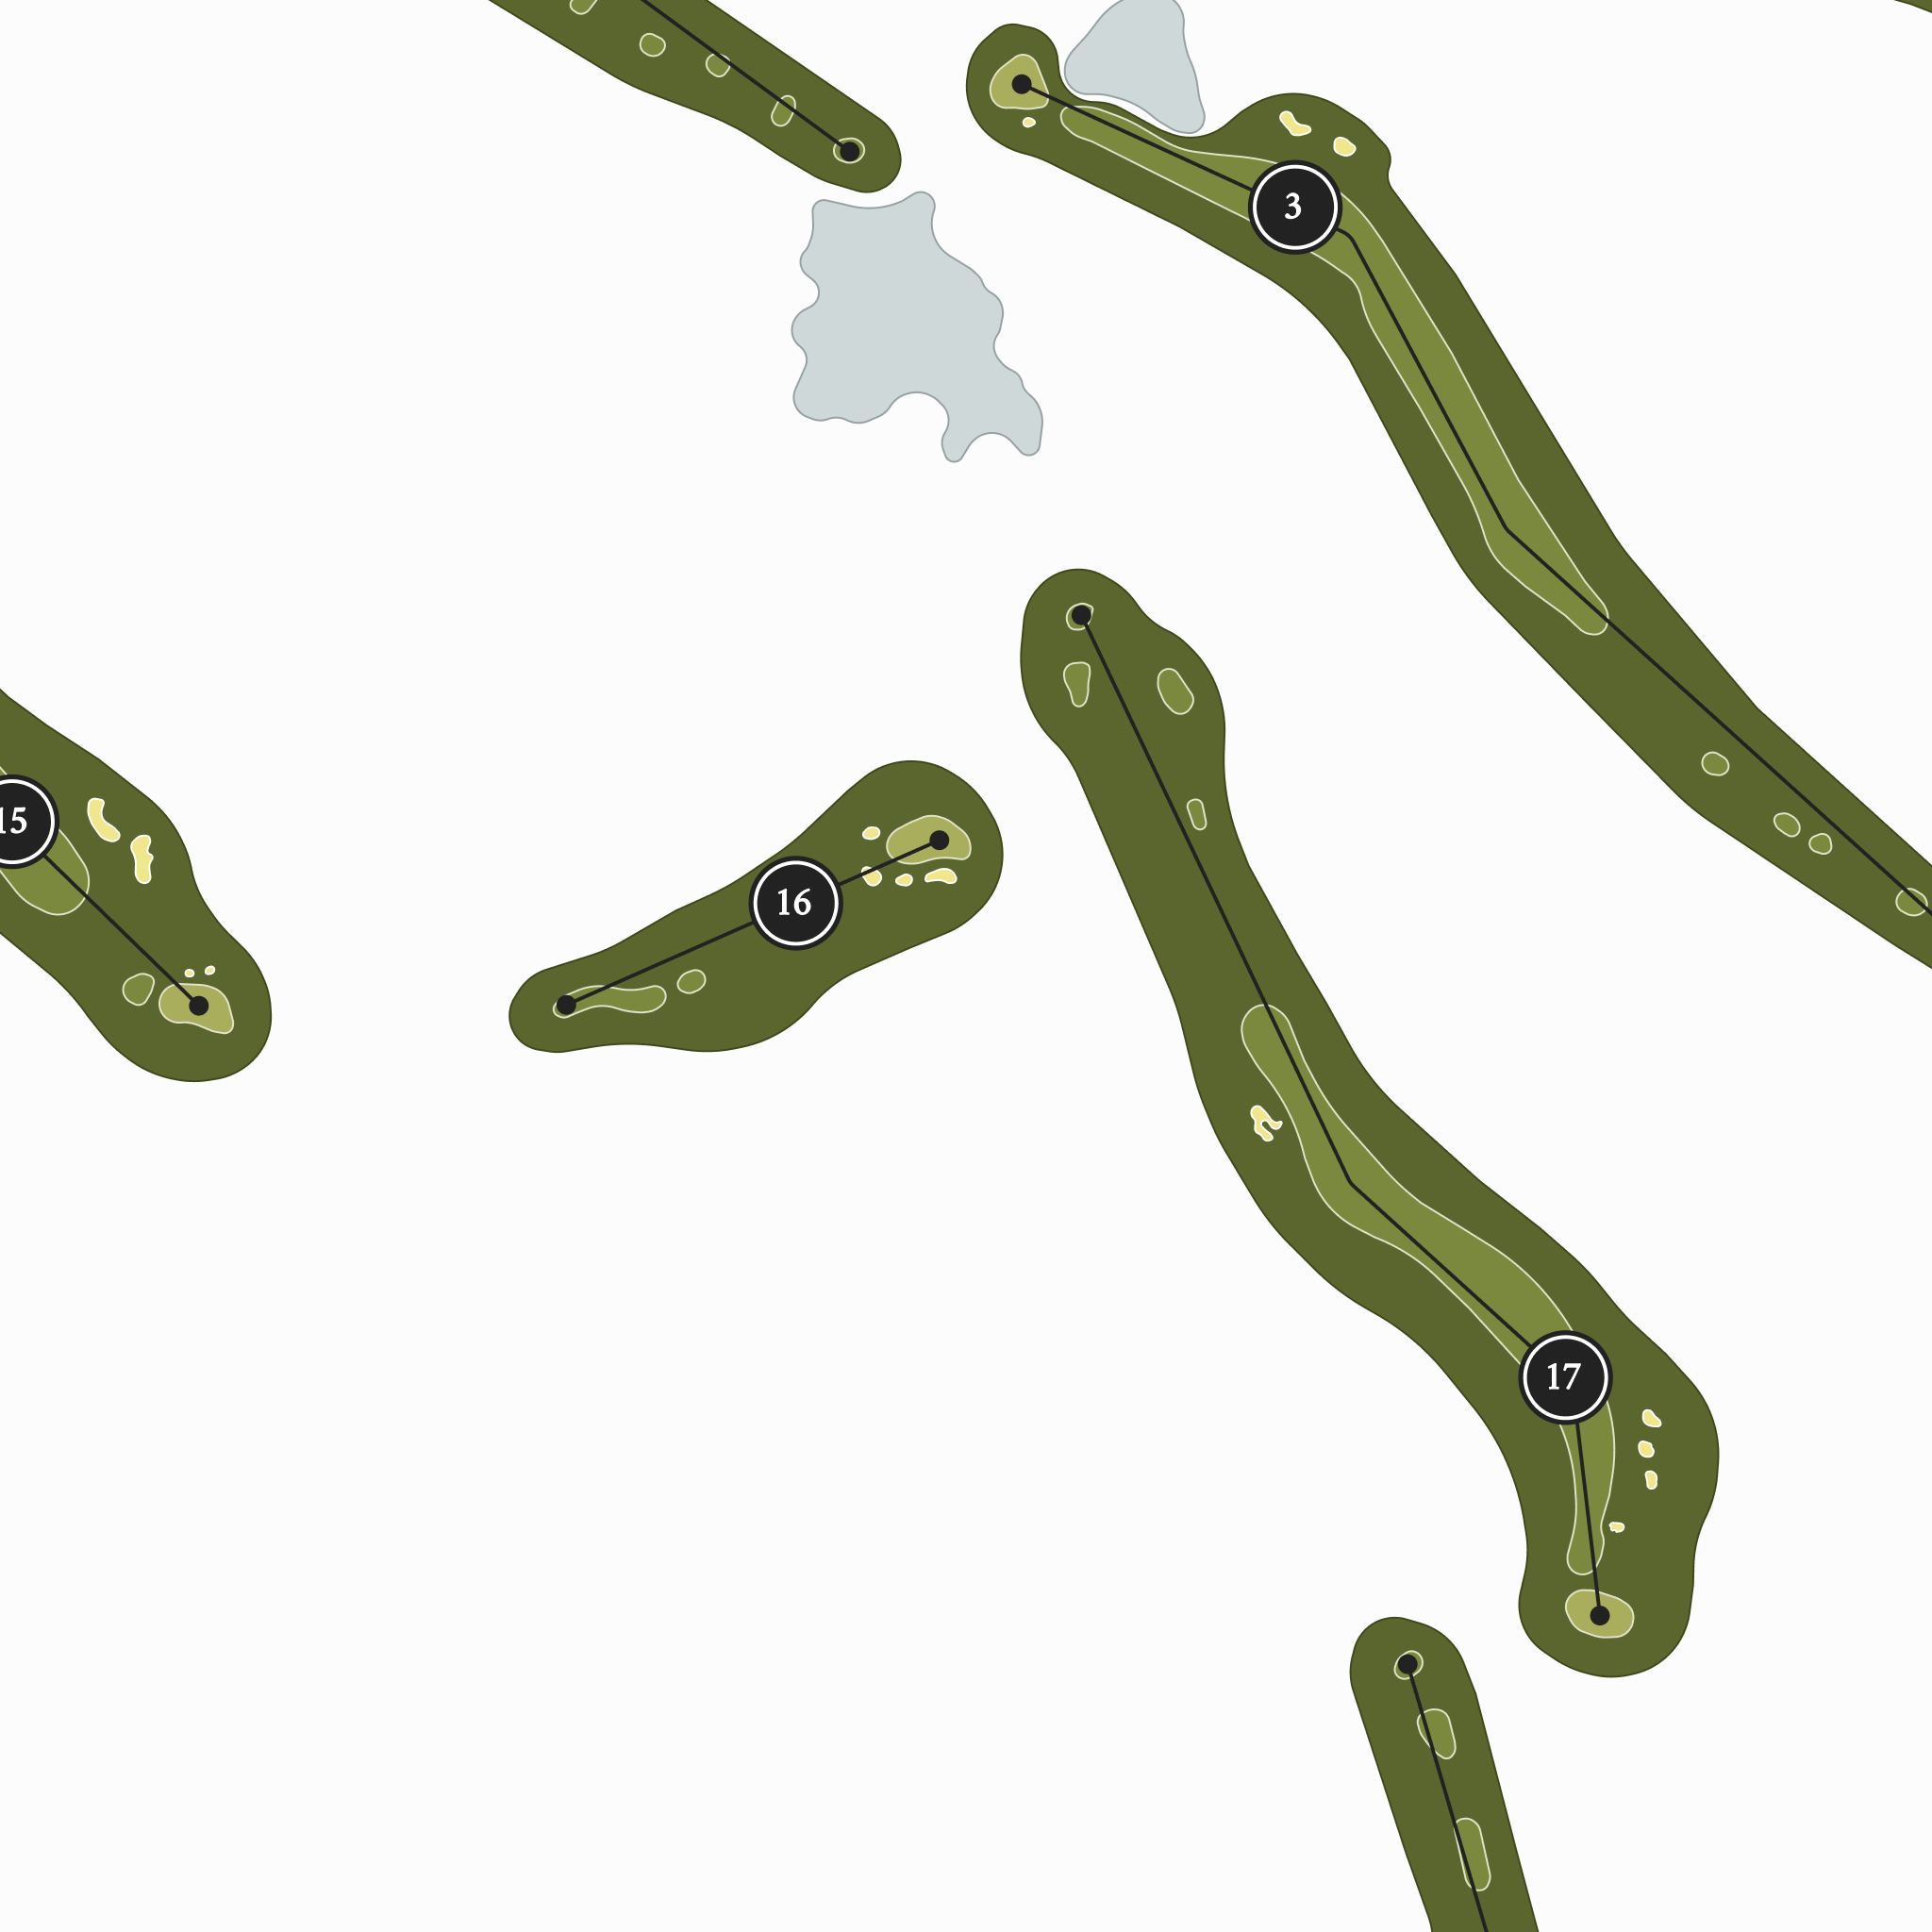 Del Lago Golf Club | Golf Course Map | Close Up With Hole Numbers #hole numbers_yes